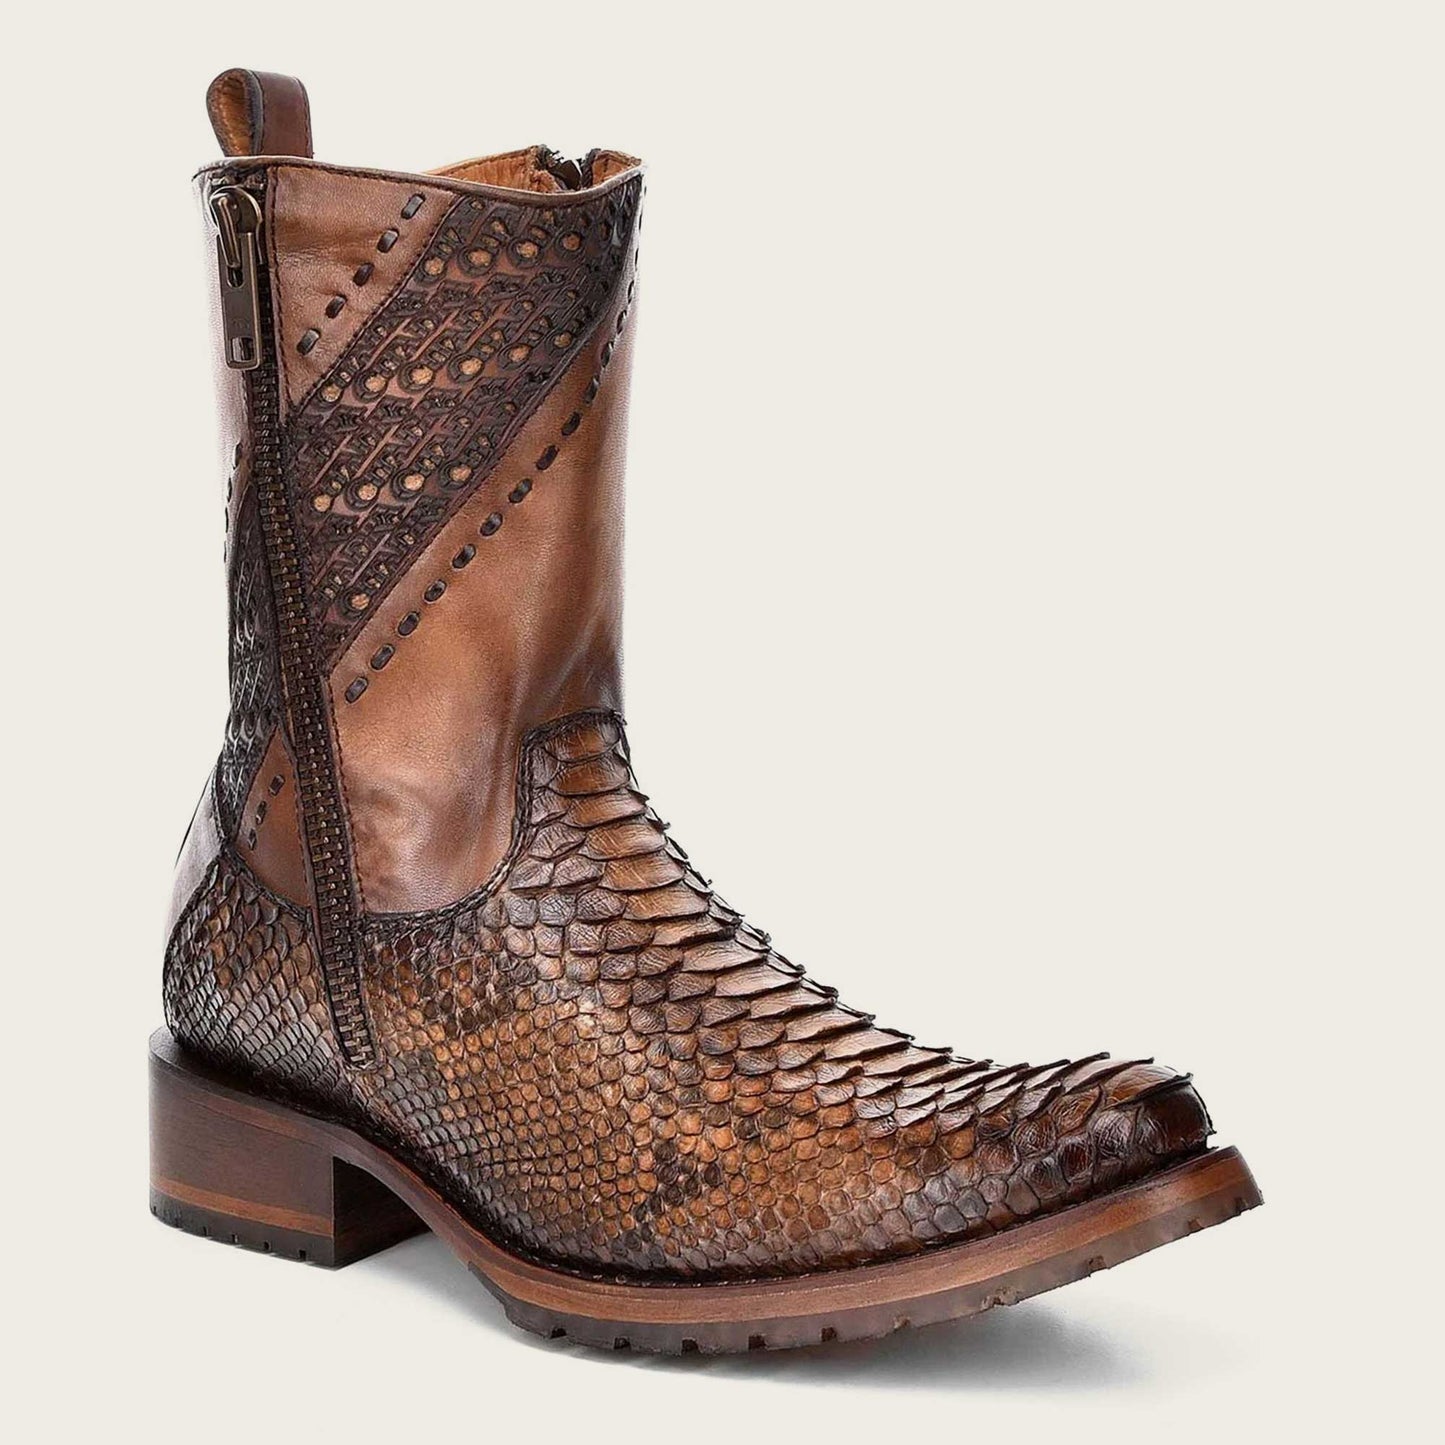 Step out in style with these engraved honey leather boots featuring intricate designs that add a touch of elegance and sophistication to your look.